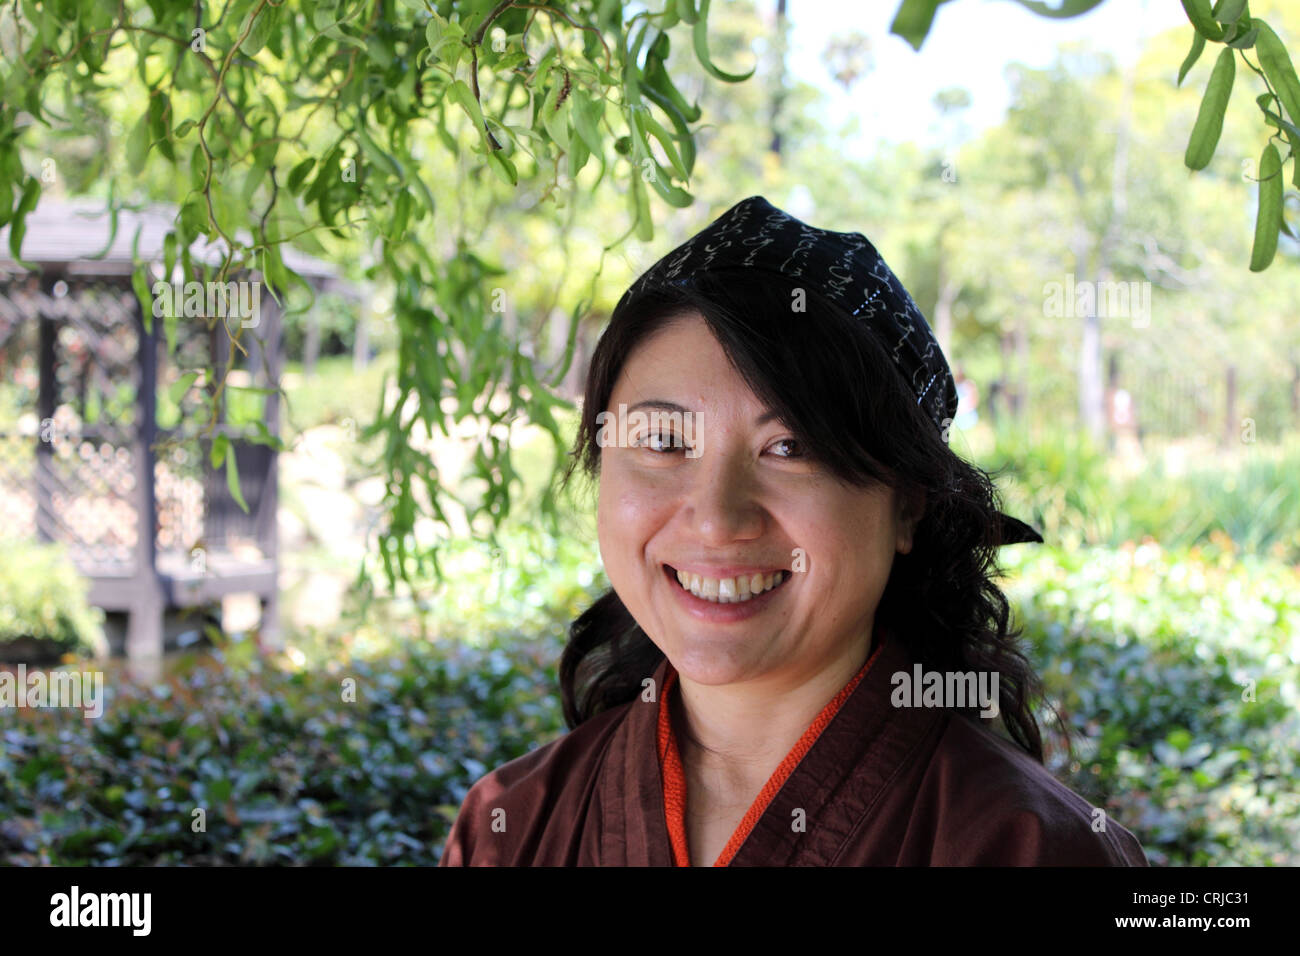 portrait of a Japanese woman with traditional clothing Stock Photo